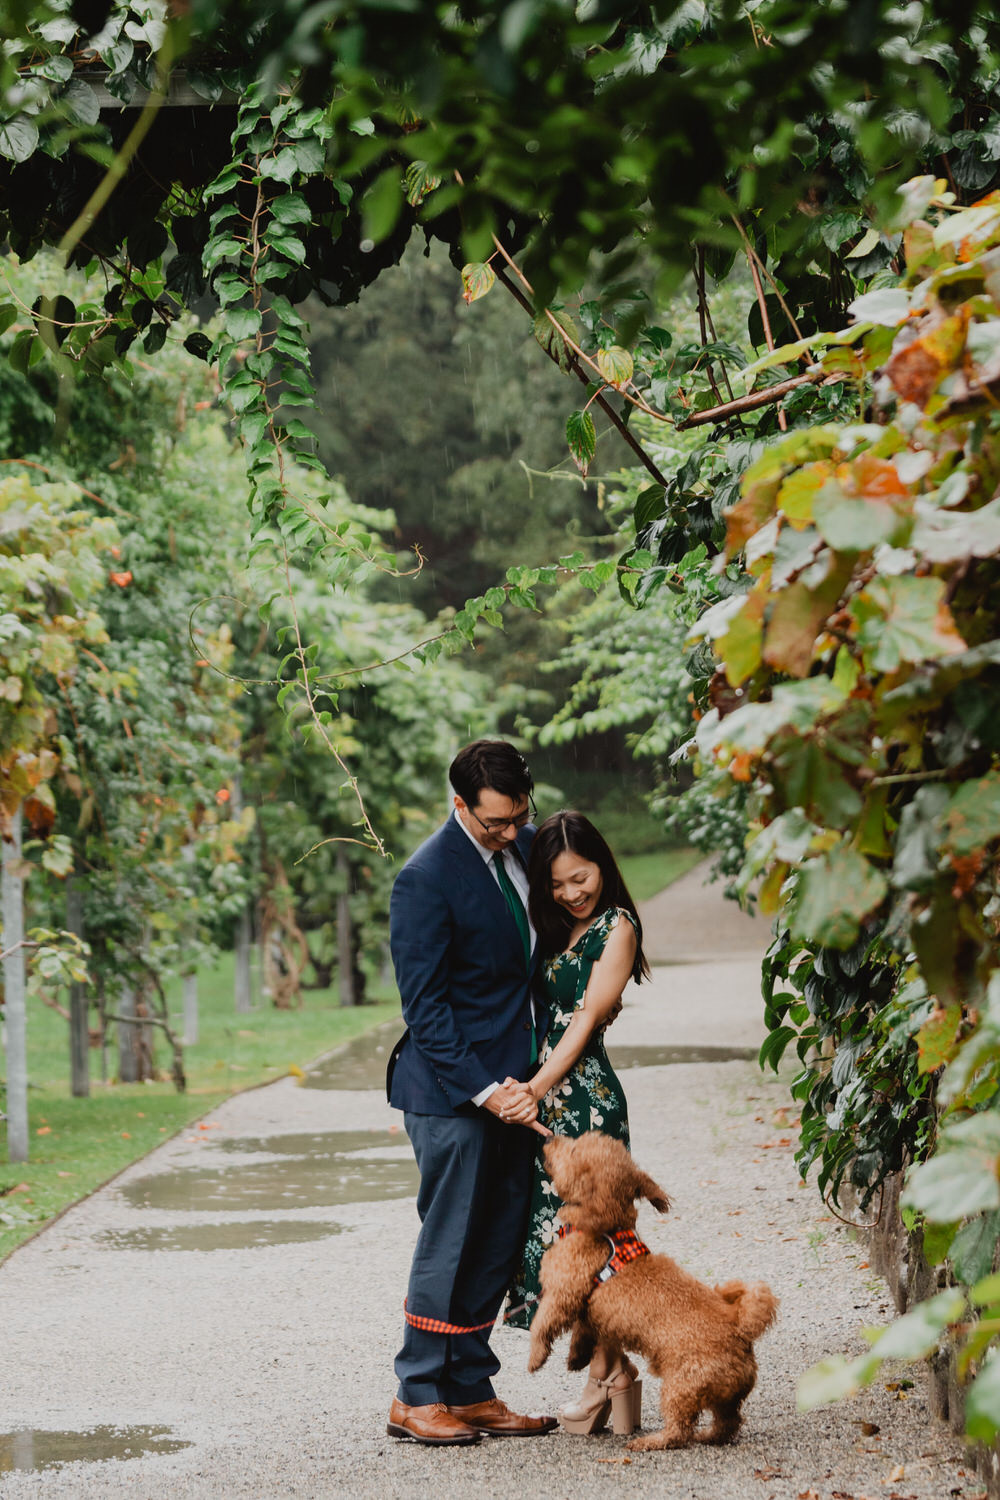 An engaged couple walking their dog through the Arnold Arboretum for their engagement photos.